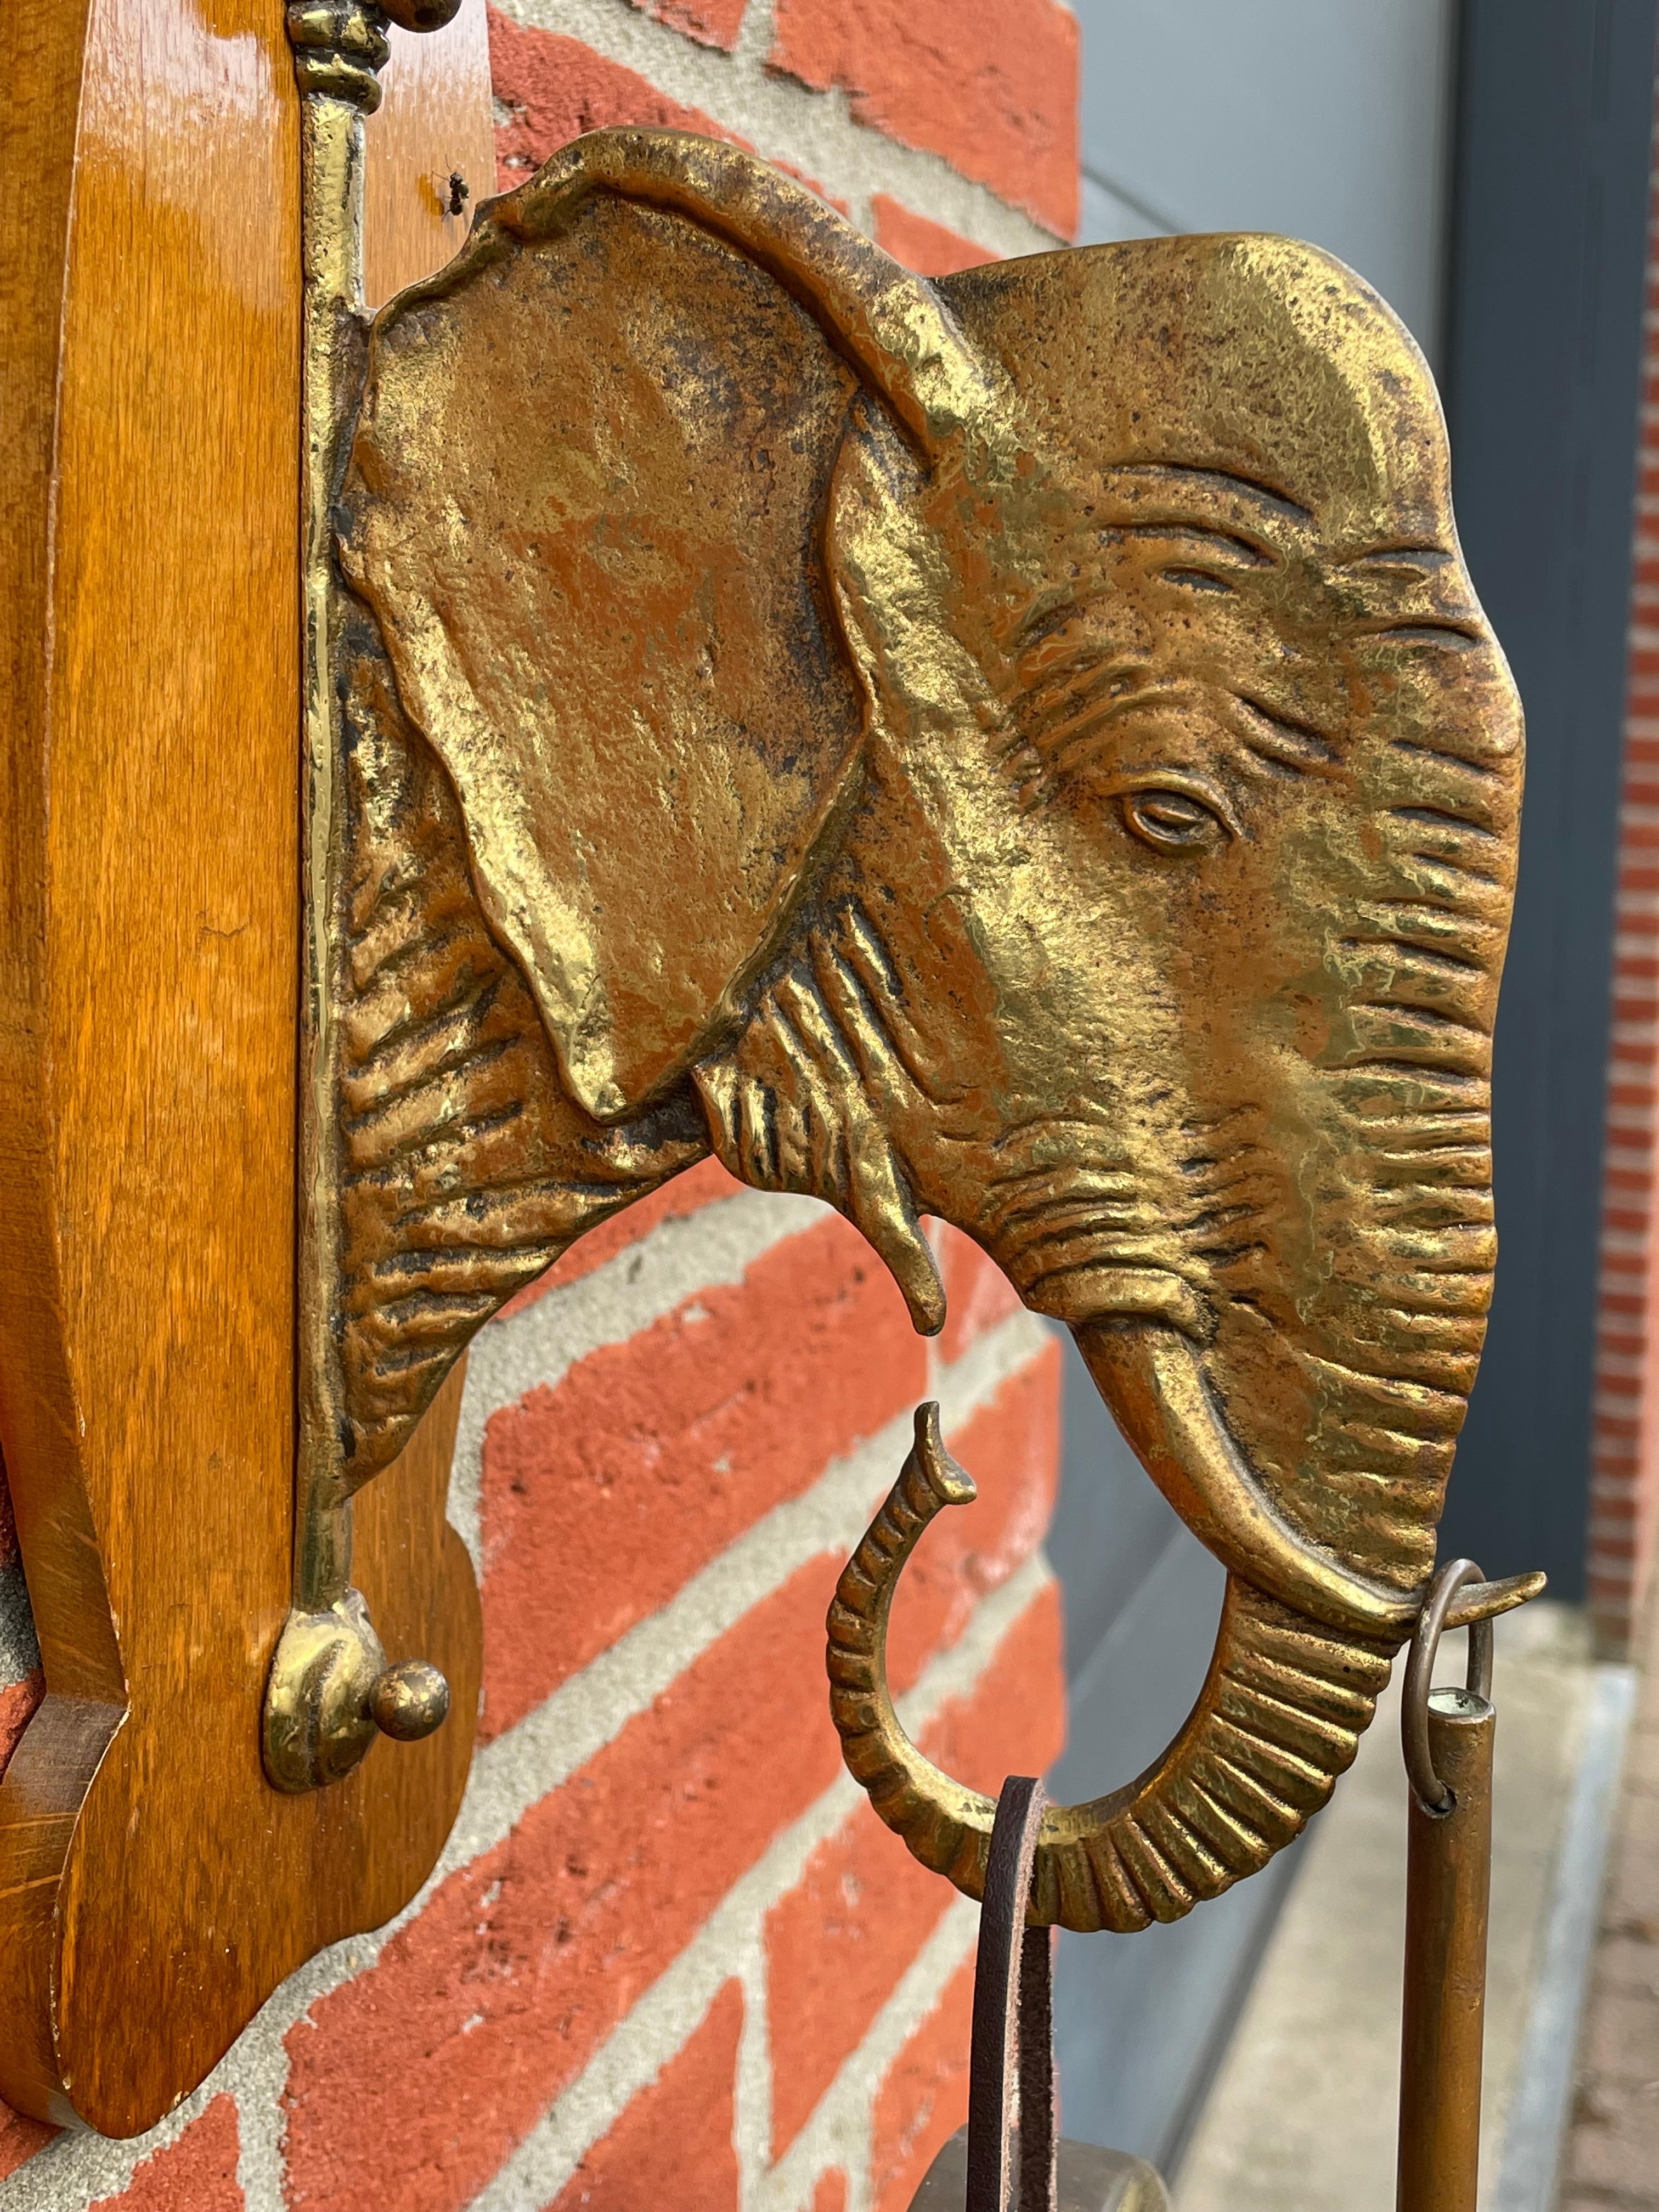 Very rare and striking (lots of pun intended) Arts & Crafts wall gong.

This remarkable house gong with an elephant sculpture even comes with the original and perfect working condition striker. The beautifully handcrafted bronze elephant and gong